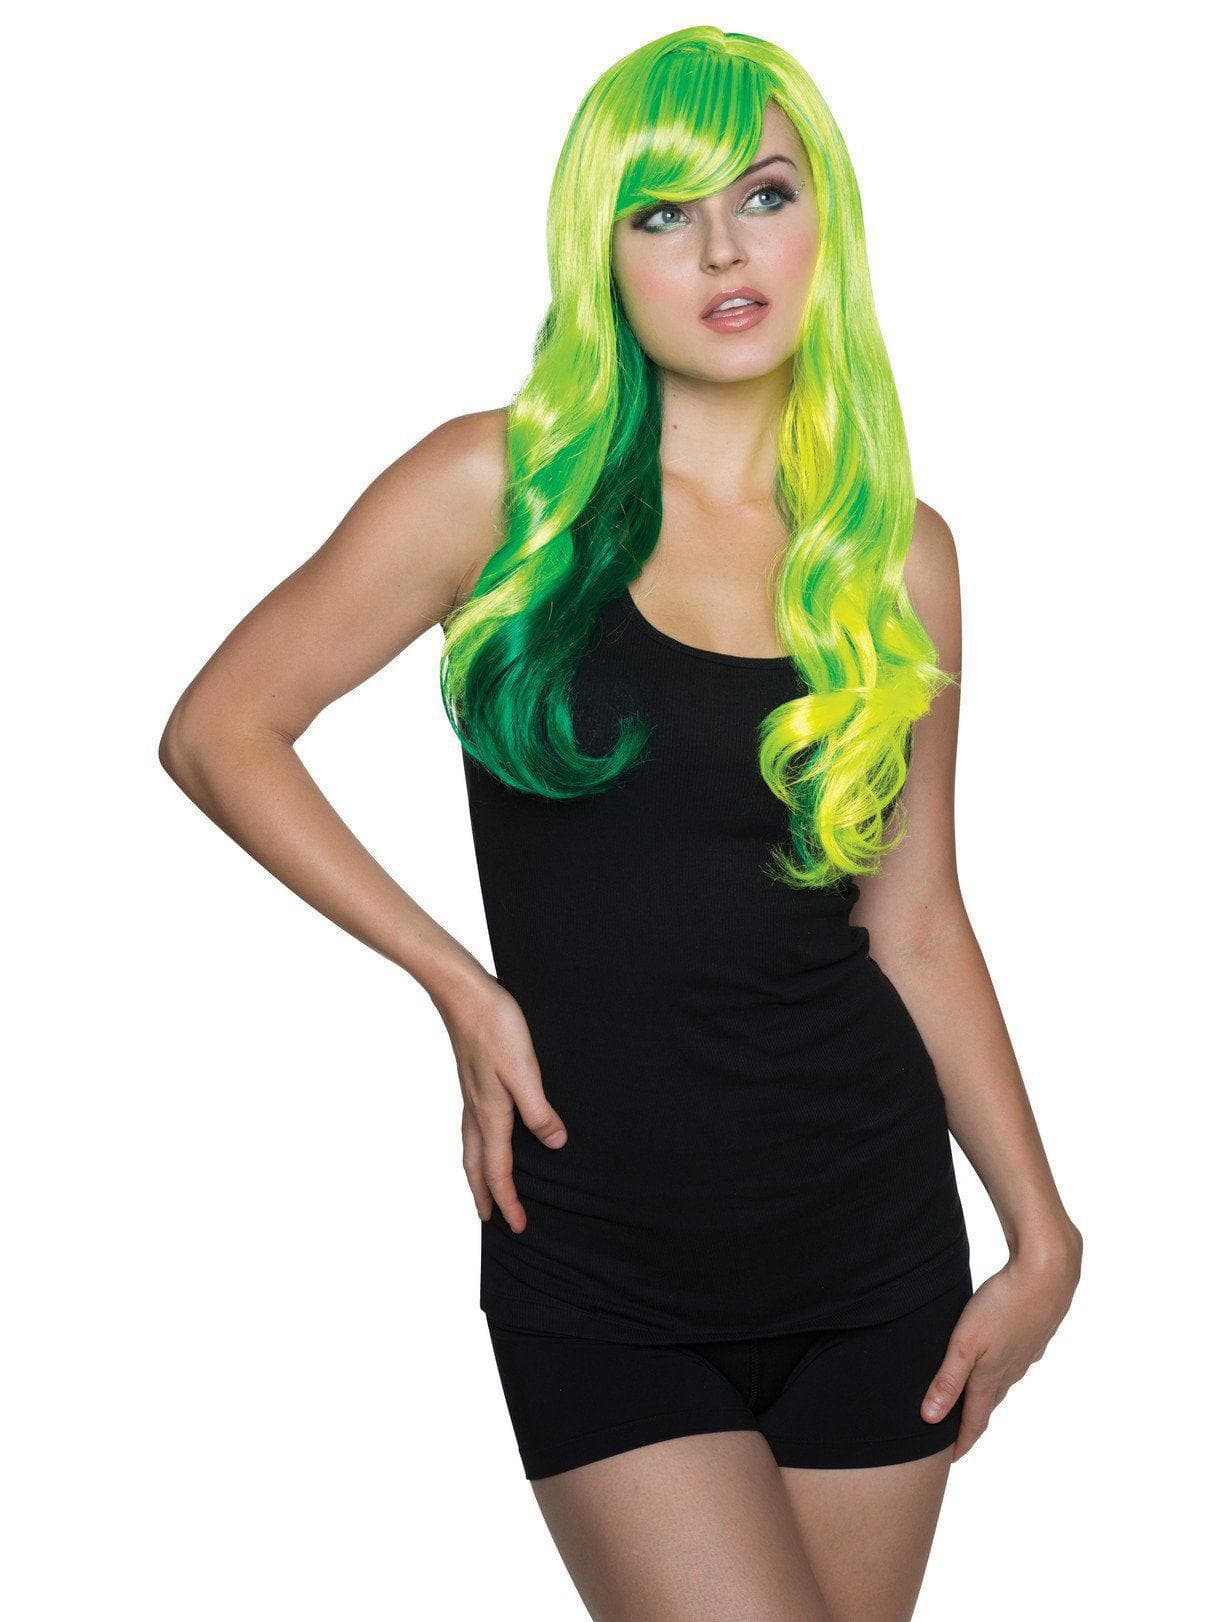 Green and Yellow Fancy Lady Wig - costumes.com